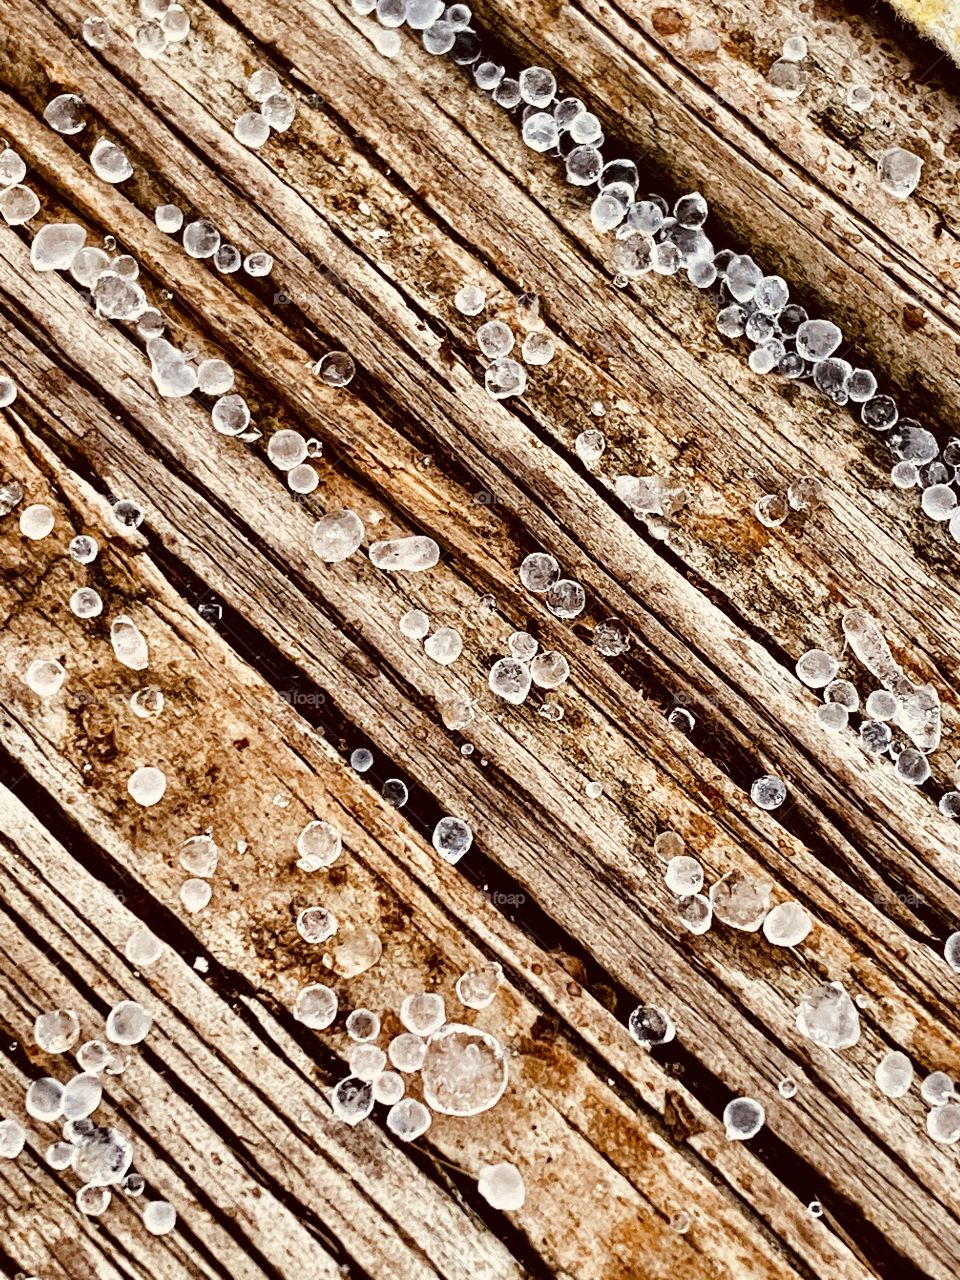 Hail on a wooden deck